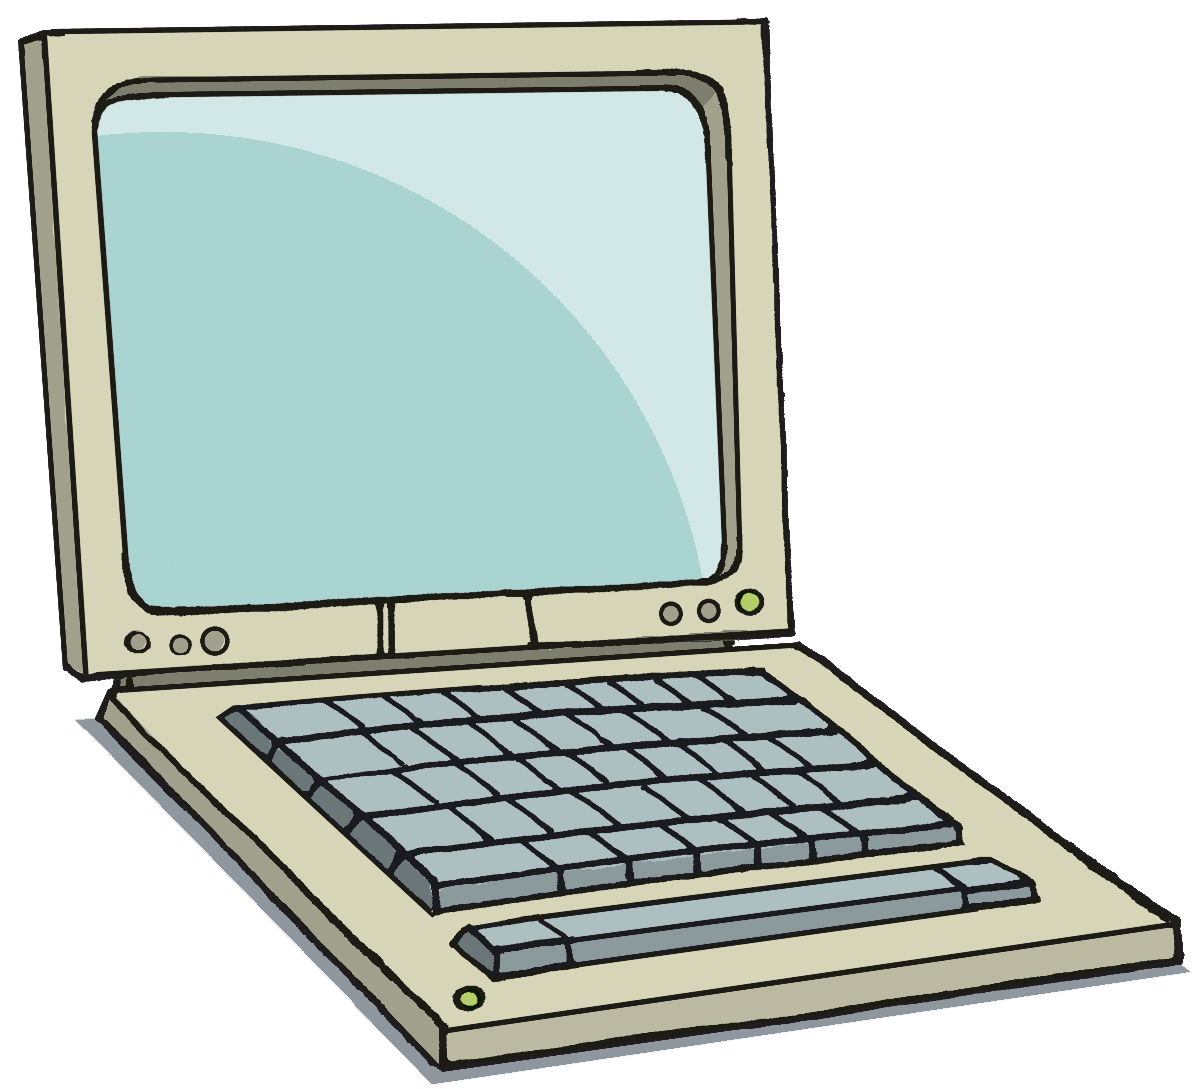 Laptop free to use cliparts 